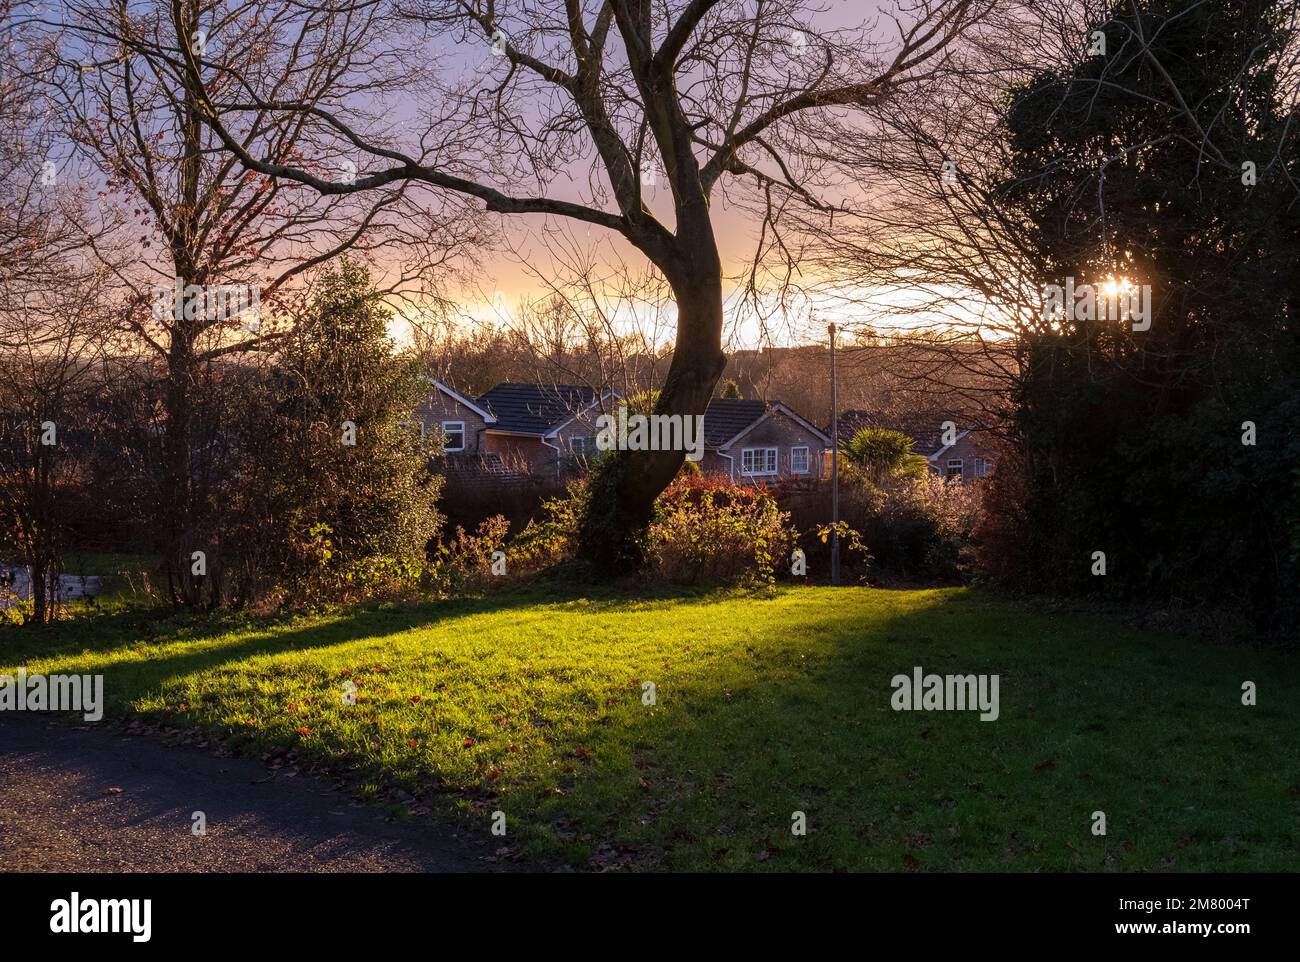 Winter sunlight setting on an urban scene casting a glow over the landscape, Worcestershire, England. Stock Photo